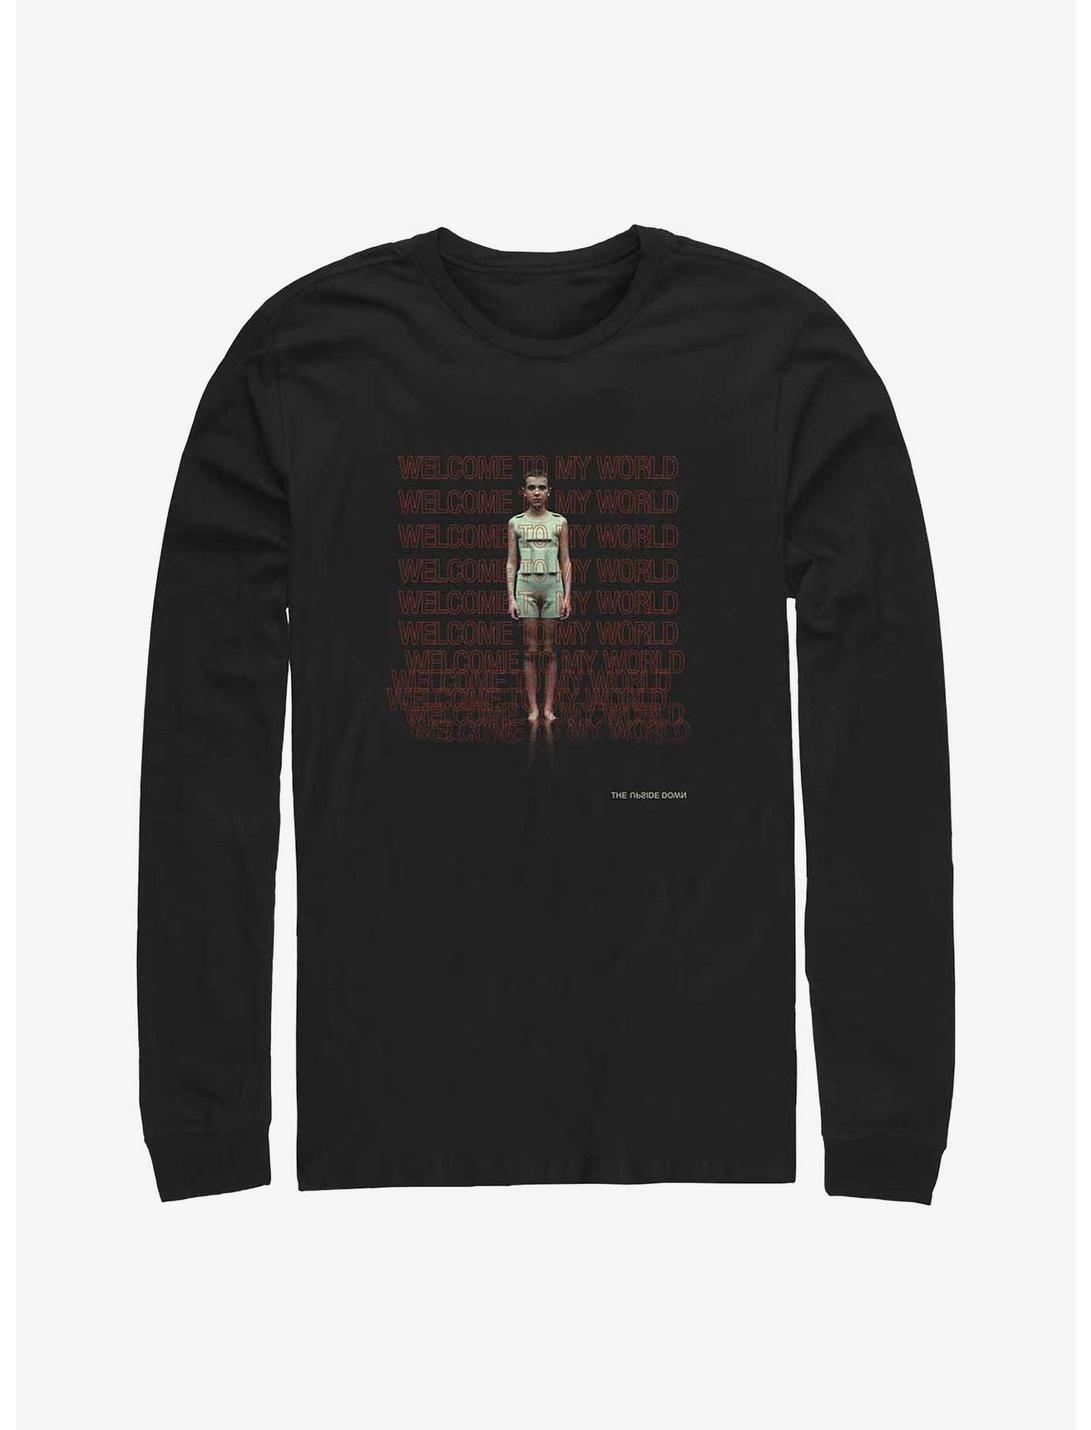 Stranger Things Welcome To My World Long-Sleeve T-Shirt, BLACK, hi-res